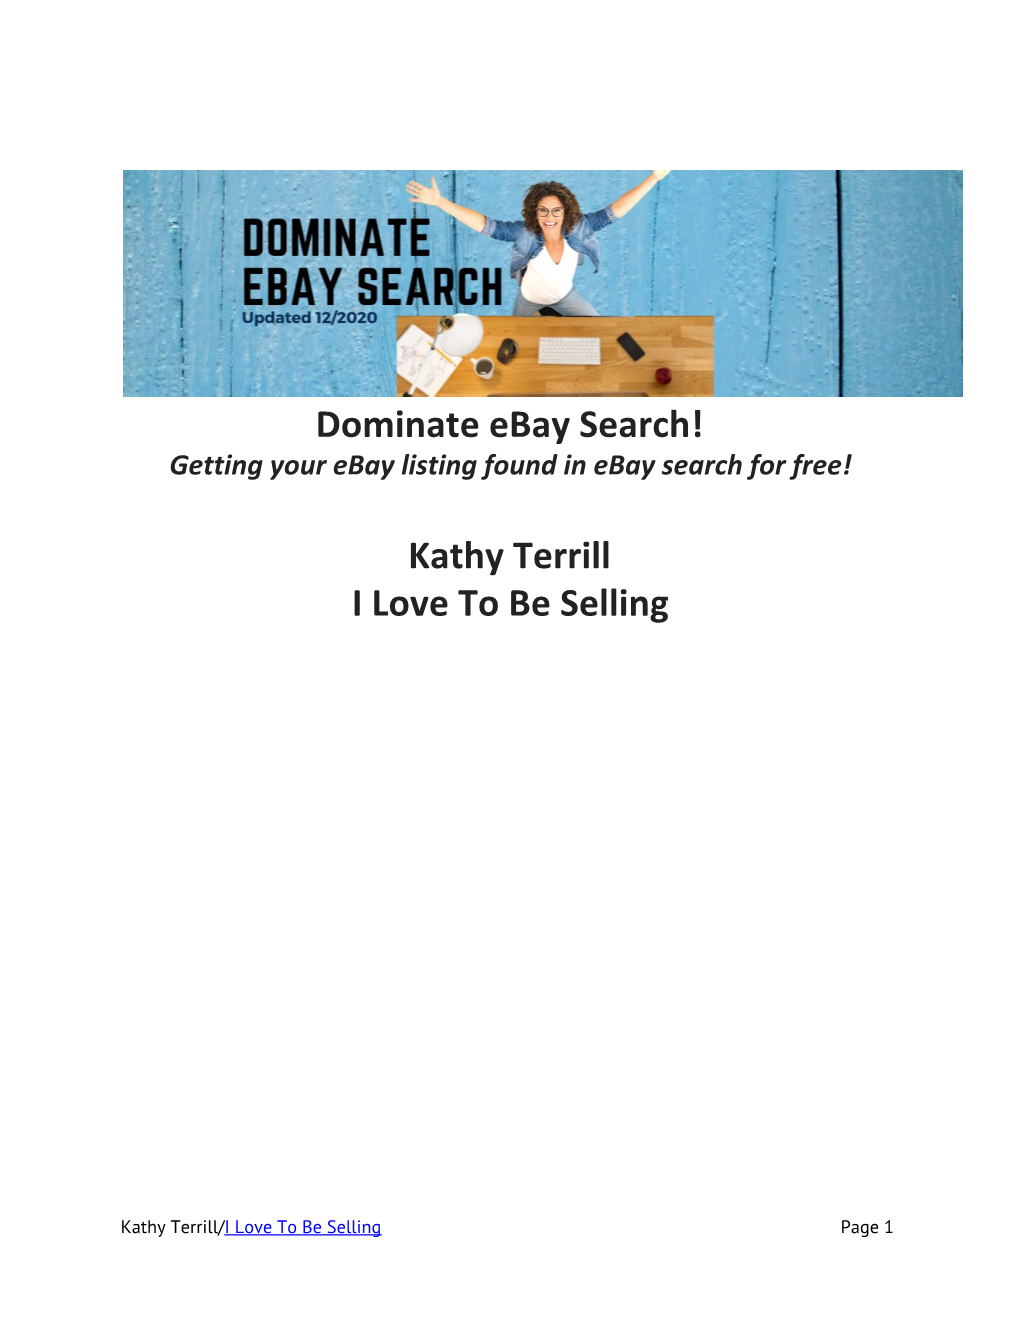 Dominate Ebay Search! Kathy Terrill I Love to Be Selling